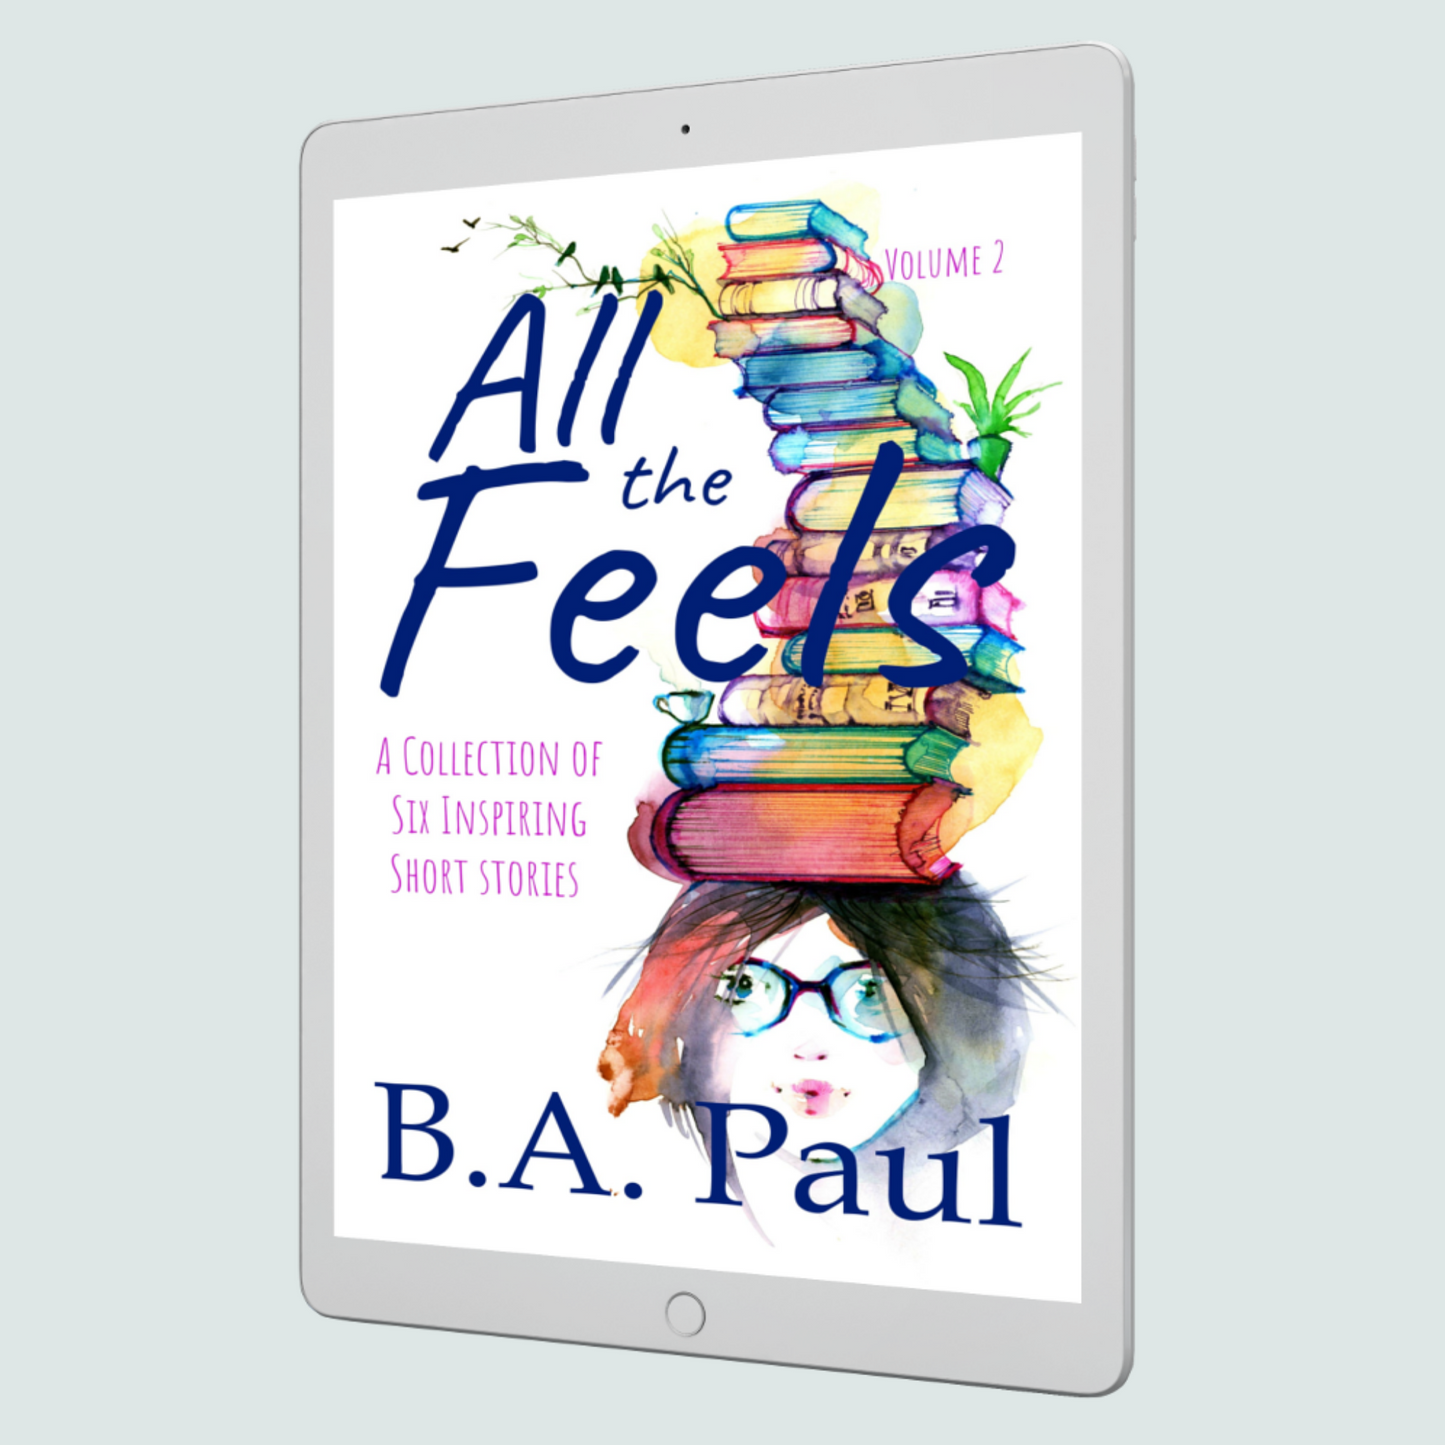 All the Feels Volume 2: A Collection of Six Inspiring Short Stories, E-book